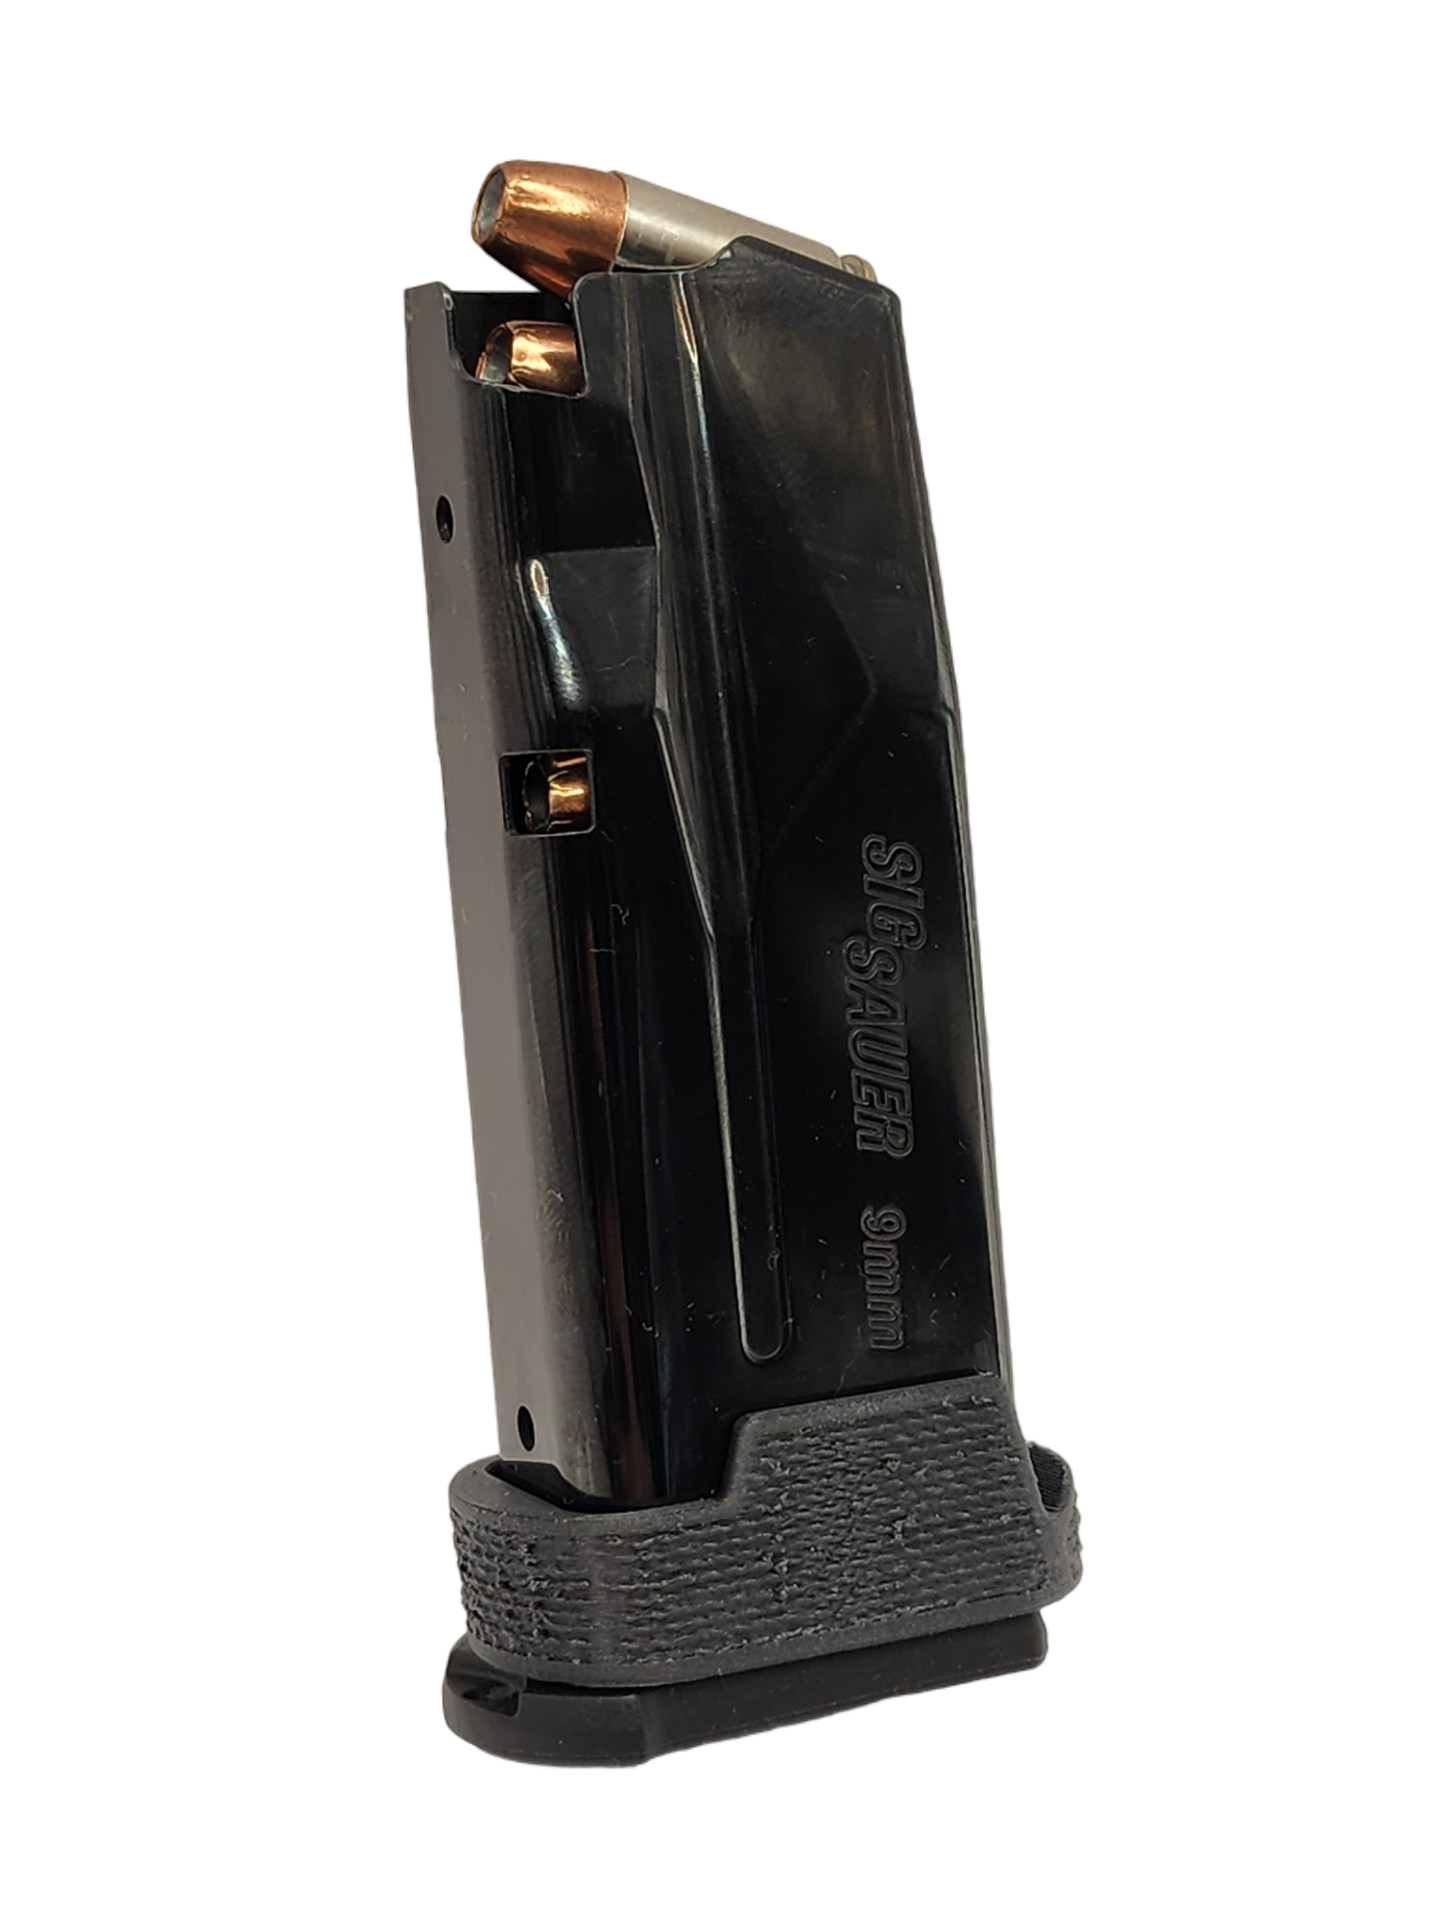 The Sig Sauer P365 12 round magazines continue the large capacity in a small space that the original 10 round magazines introduced.  The NULL Adapters allow you to use the 12 round magazines seamlessly in your standard P365